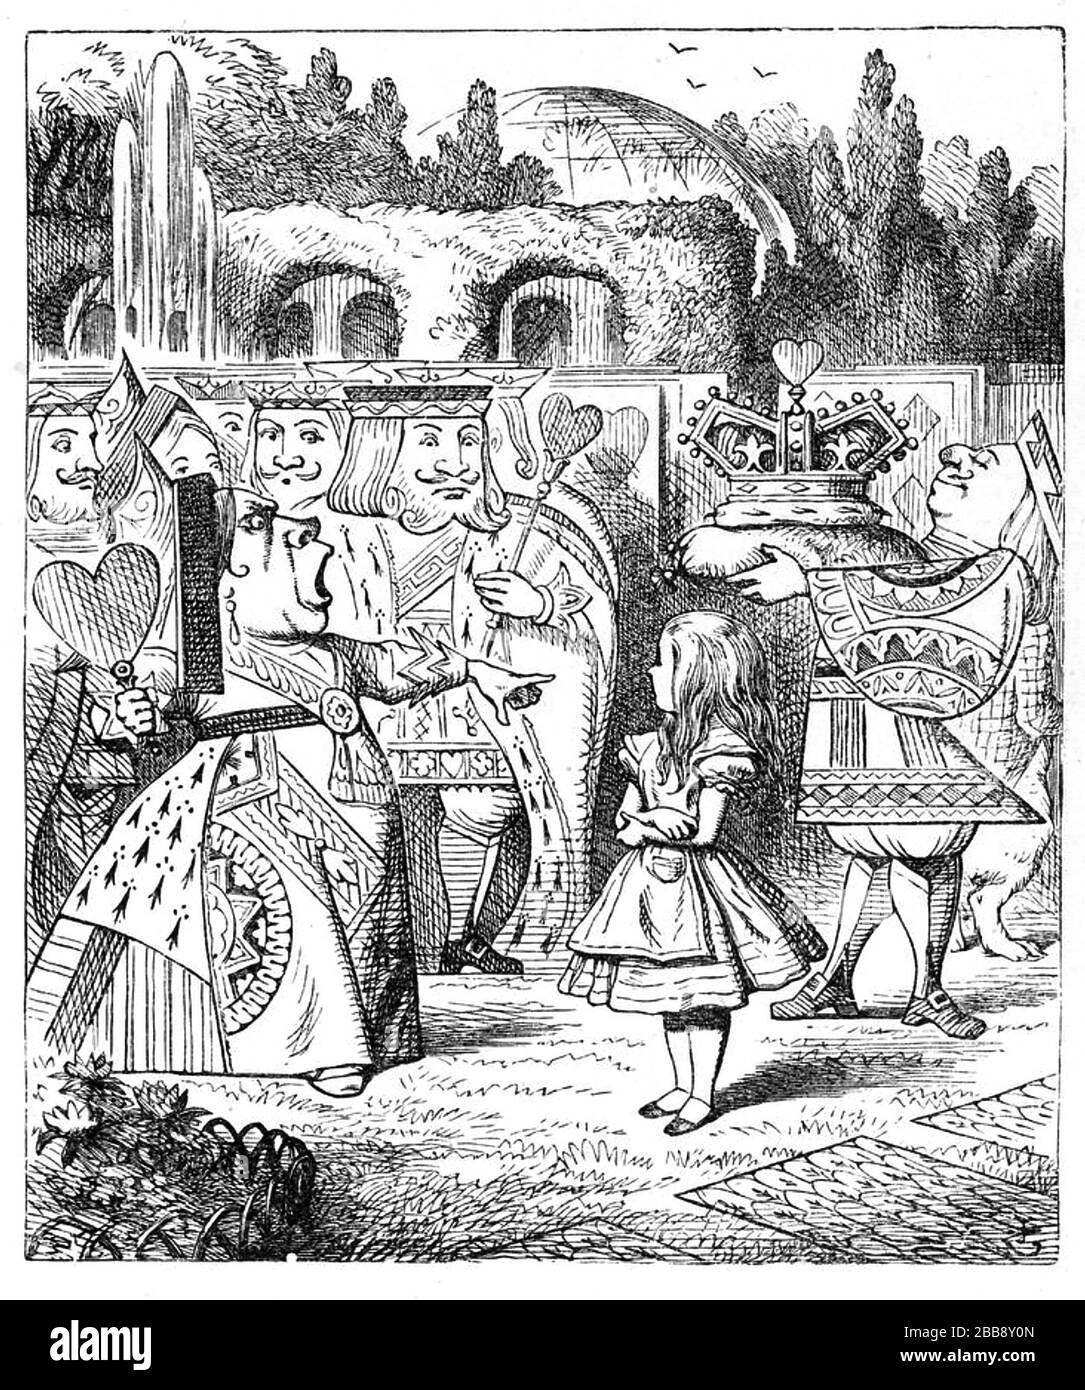 ALICE'S ADVENTURES IN WONDERLAND The Queen of Hearts orders 'Off with his head !' Illustration by John Tenniel 1865 Stock Photo